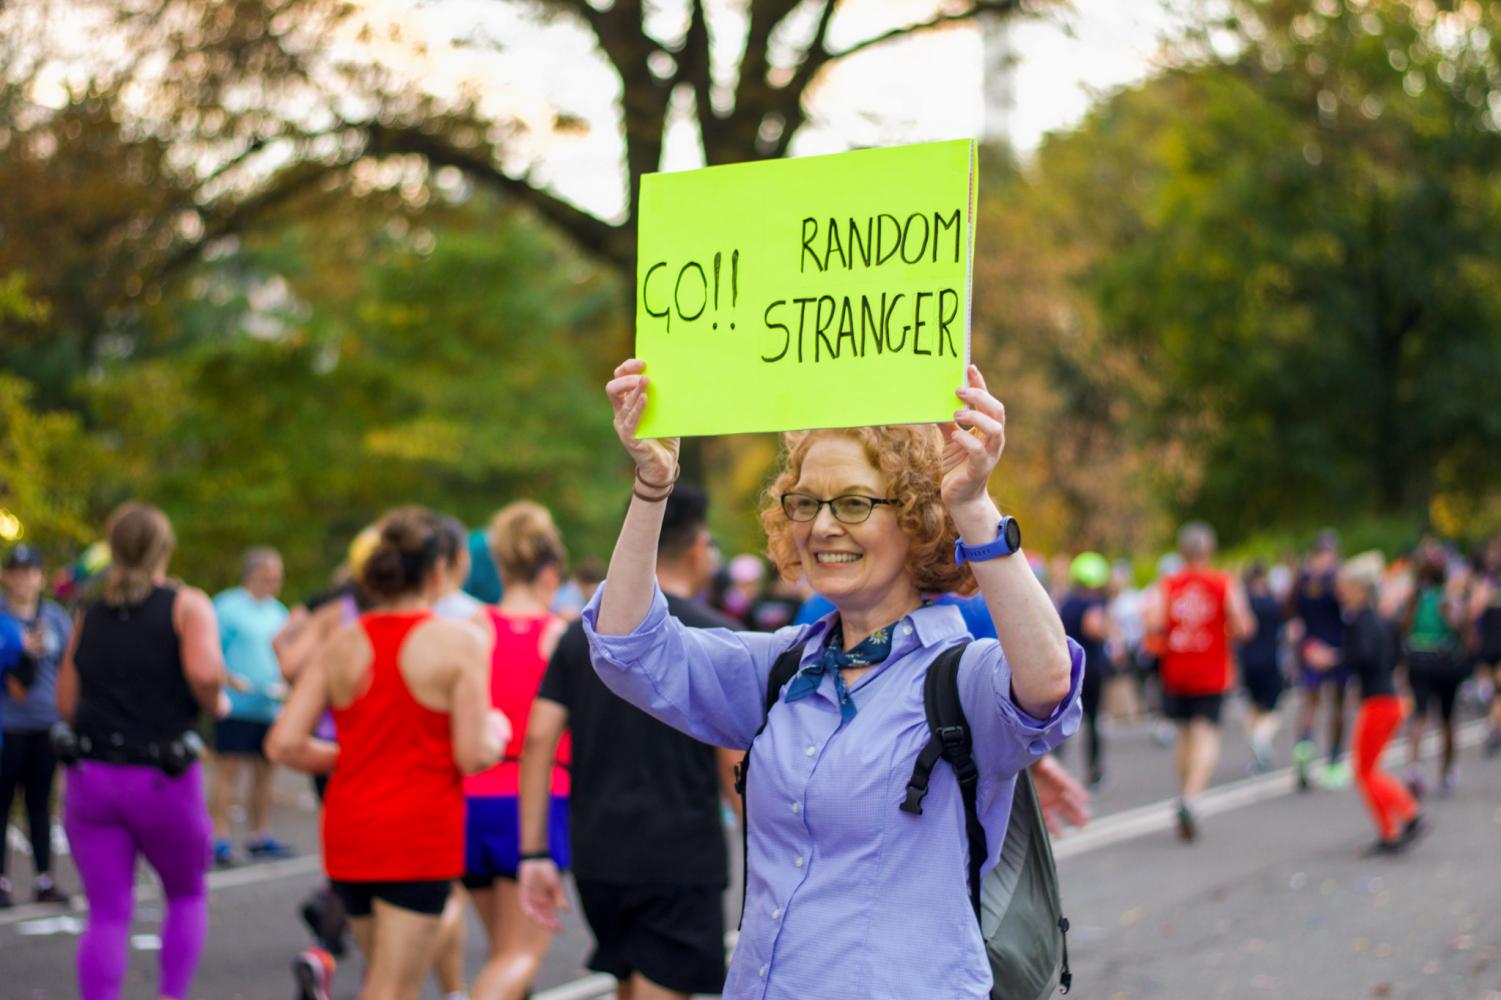 A female wearing a blue long-sleeve shirt and a blue scarf in her neck holds a green poster that reads in black colored font: “Go!! Random Stranger.”